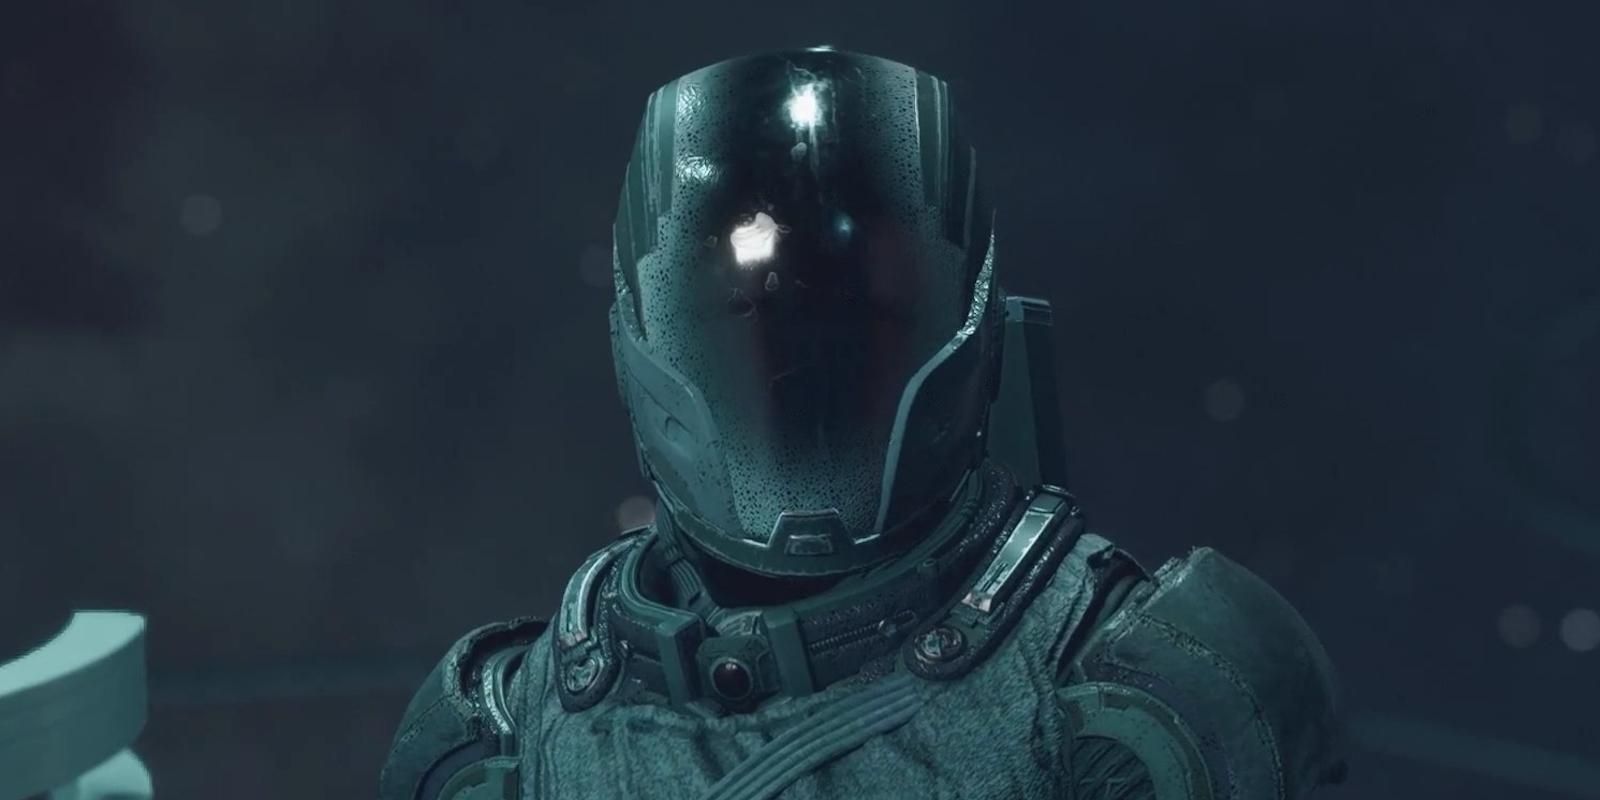 The Hunter in a screenshot from Starfield, against a murky, dark background. He wears a space suit with a helmet tinted so dark that no details of his face are visible.